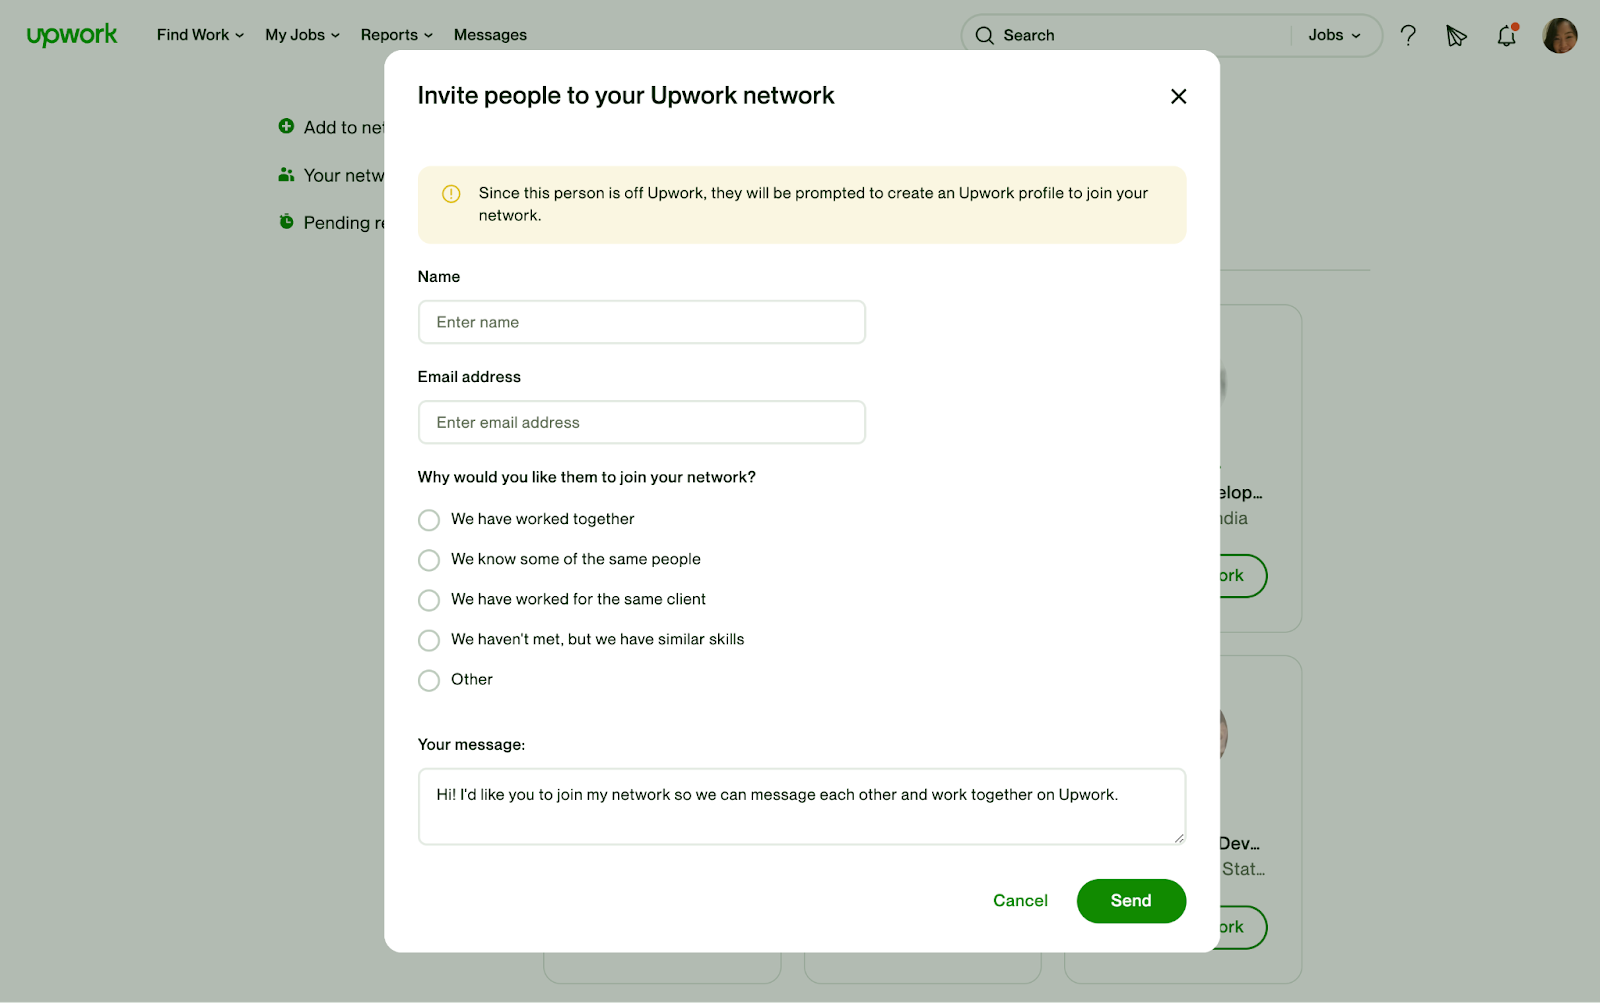 Add freelancers that are not on Upwork